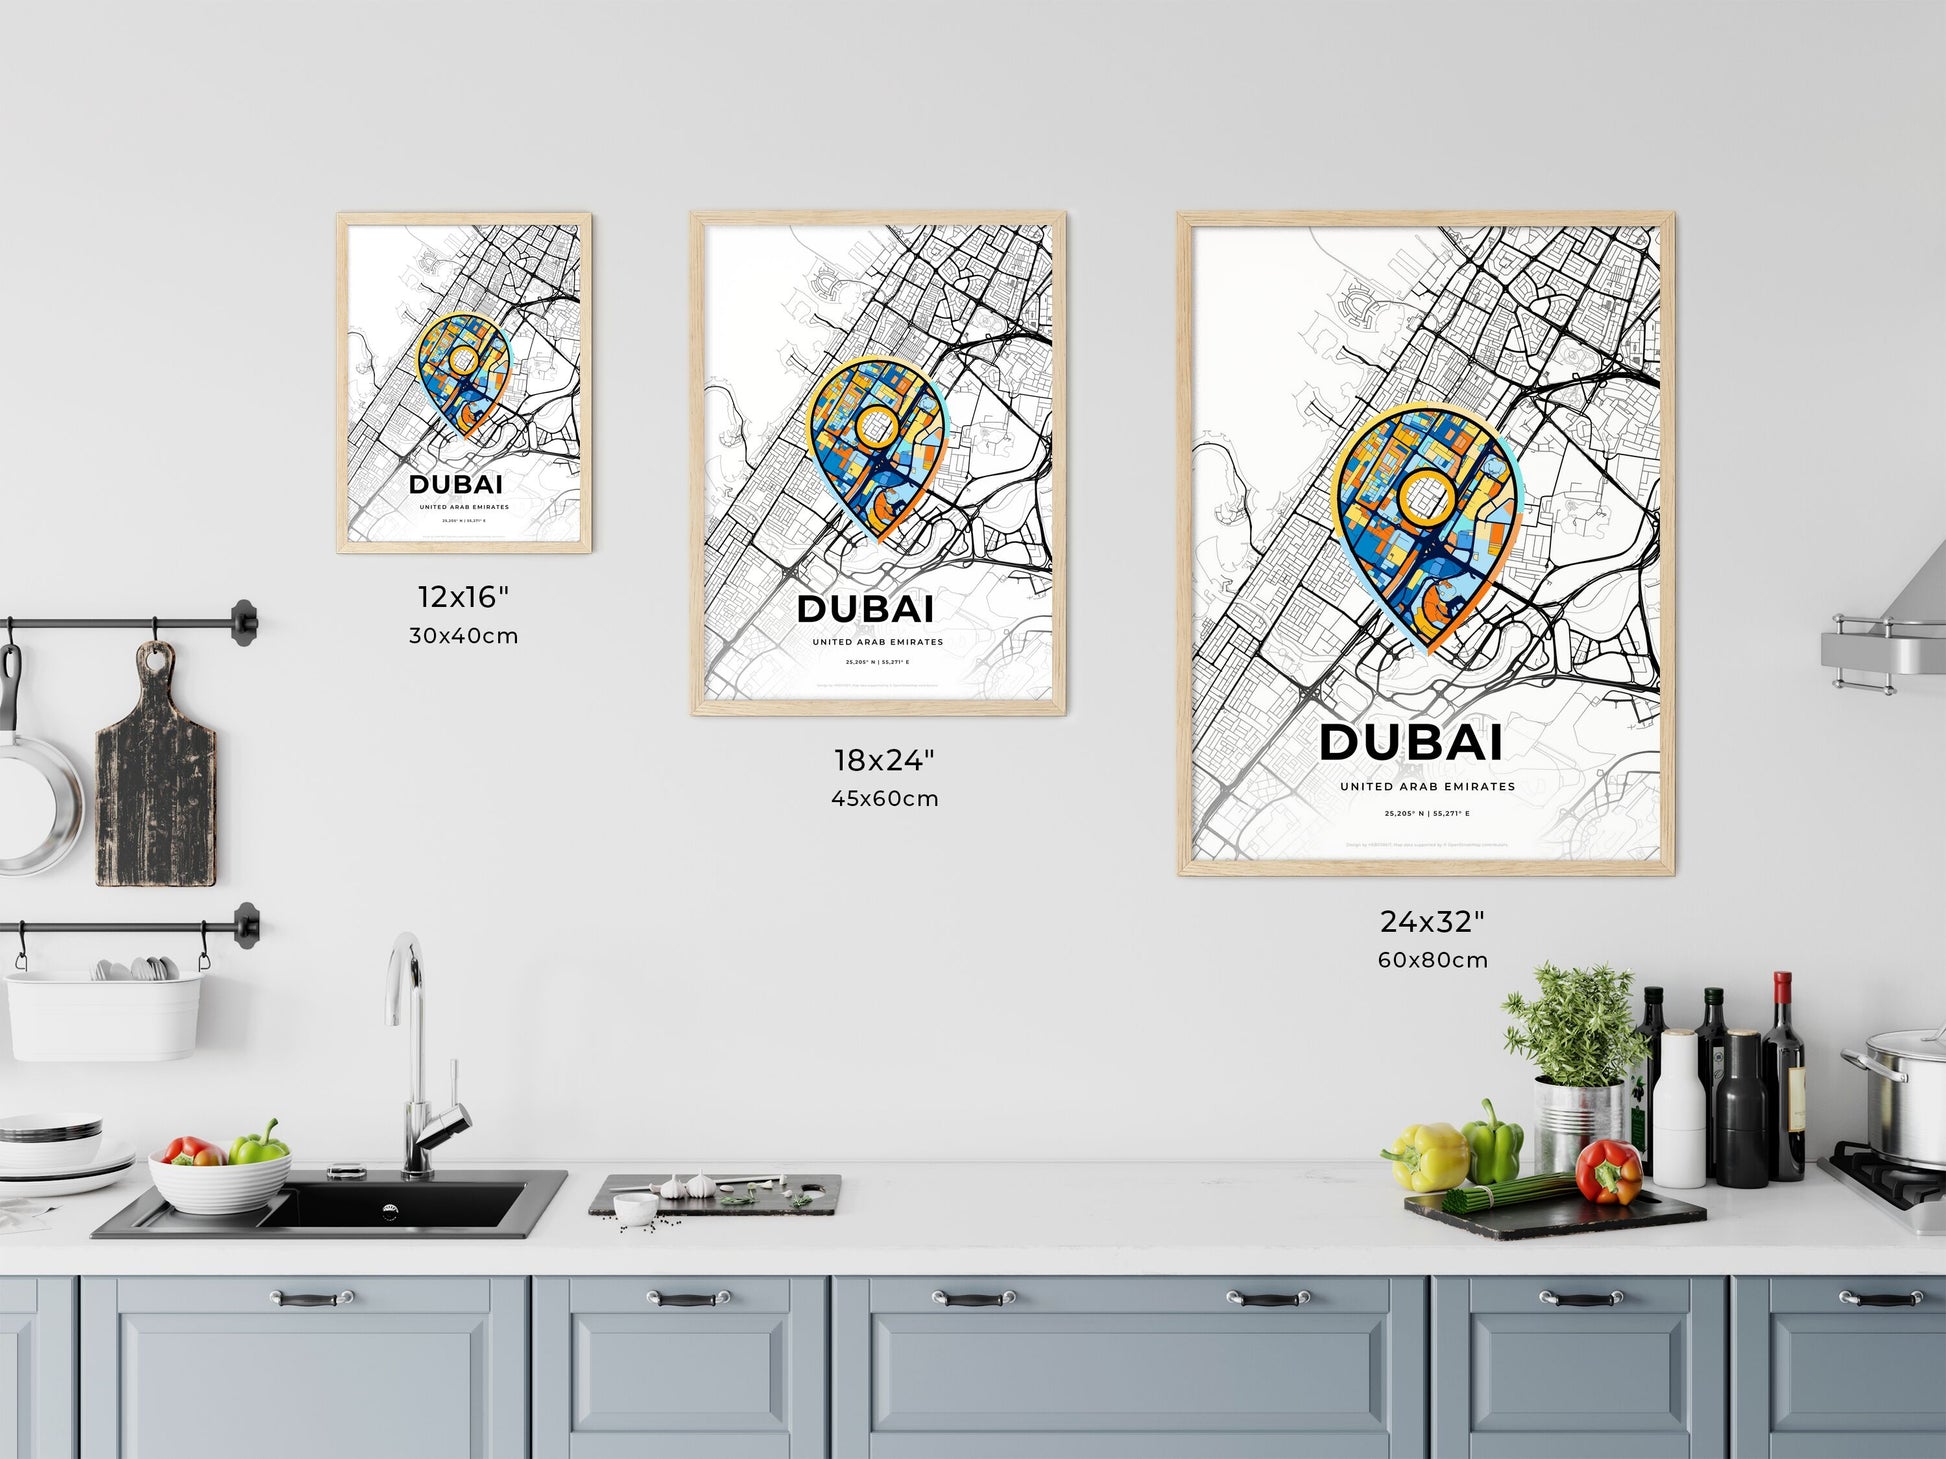 DUBAI UNITED ARAB EMIRATES minimal art map with a colorful icon. Where it all began, Couple map gift.